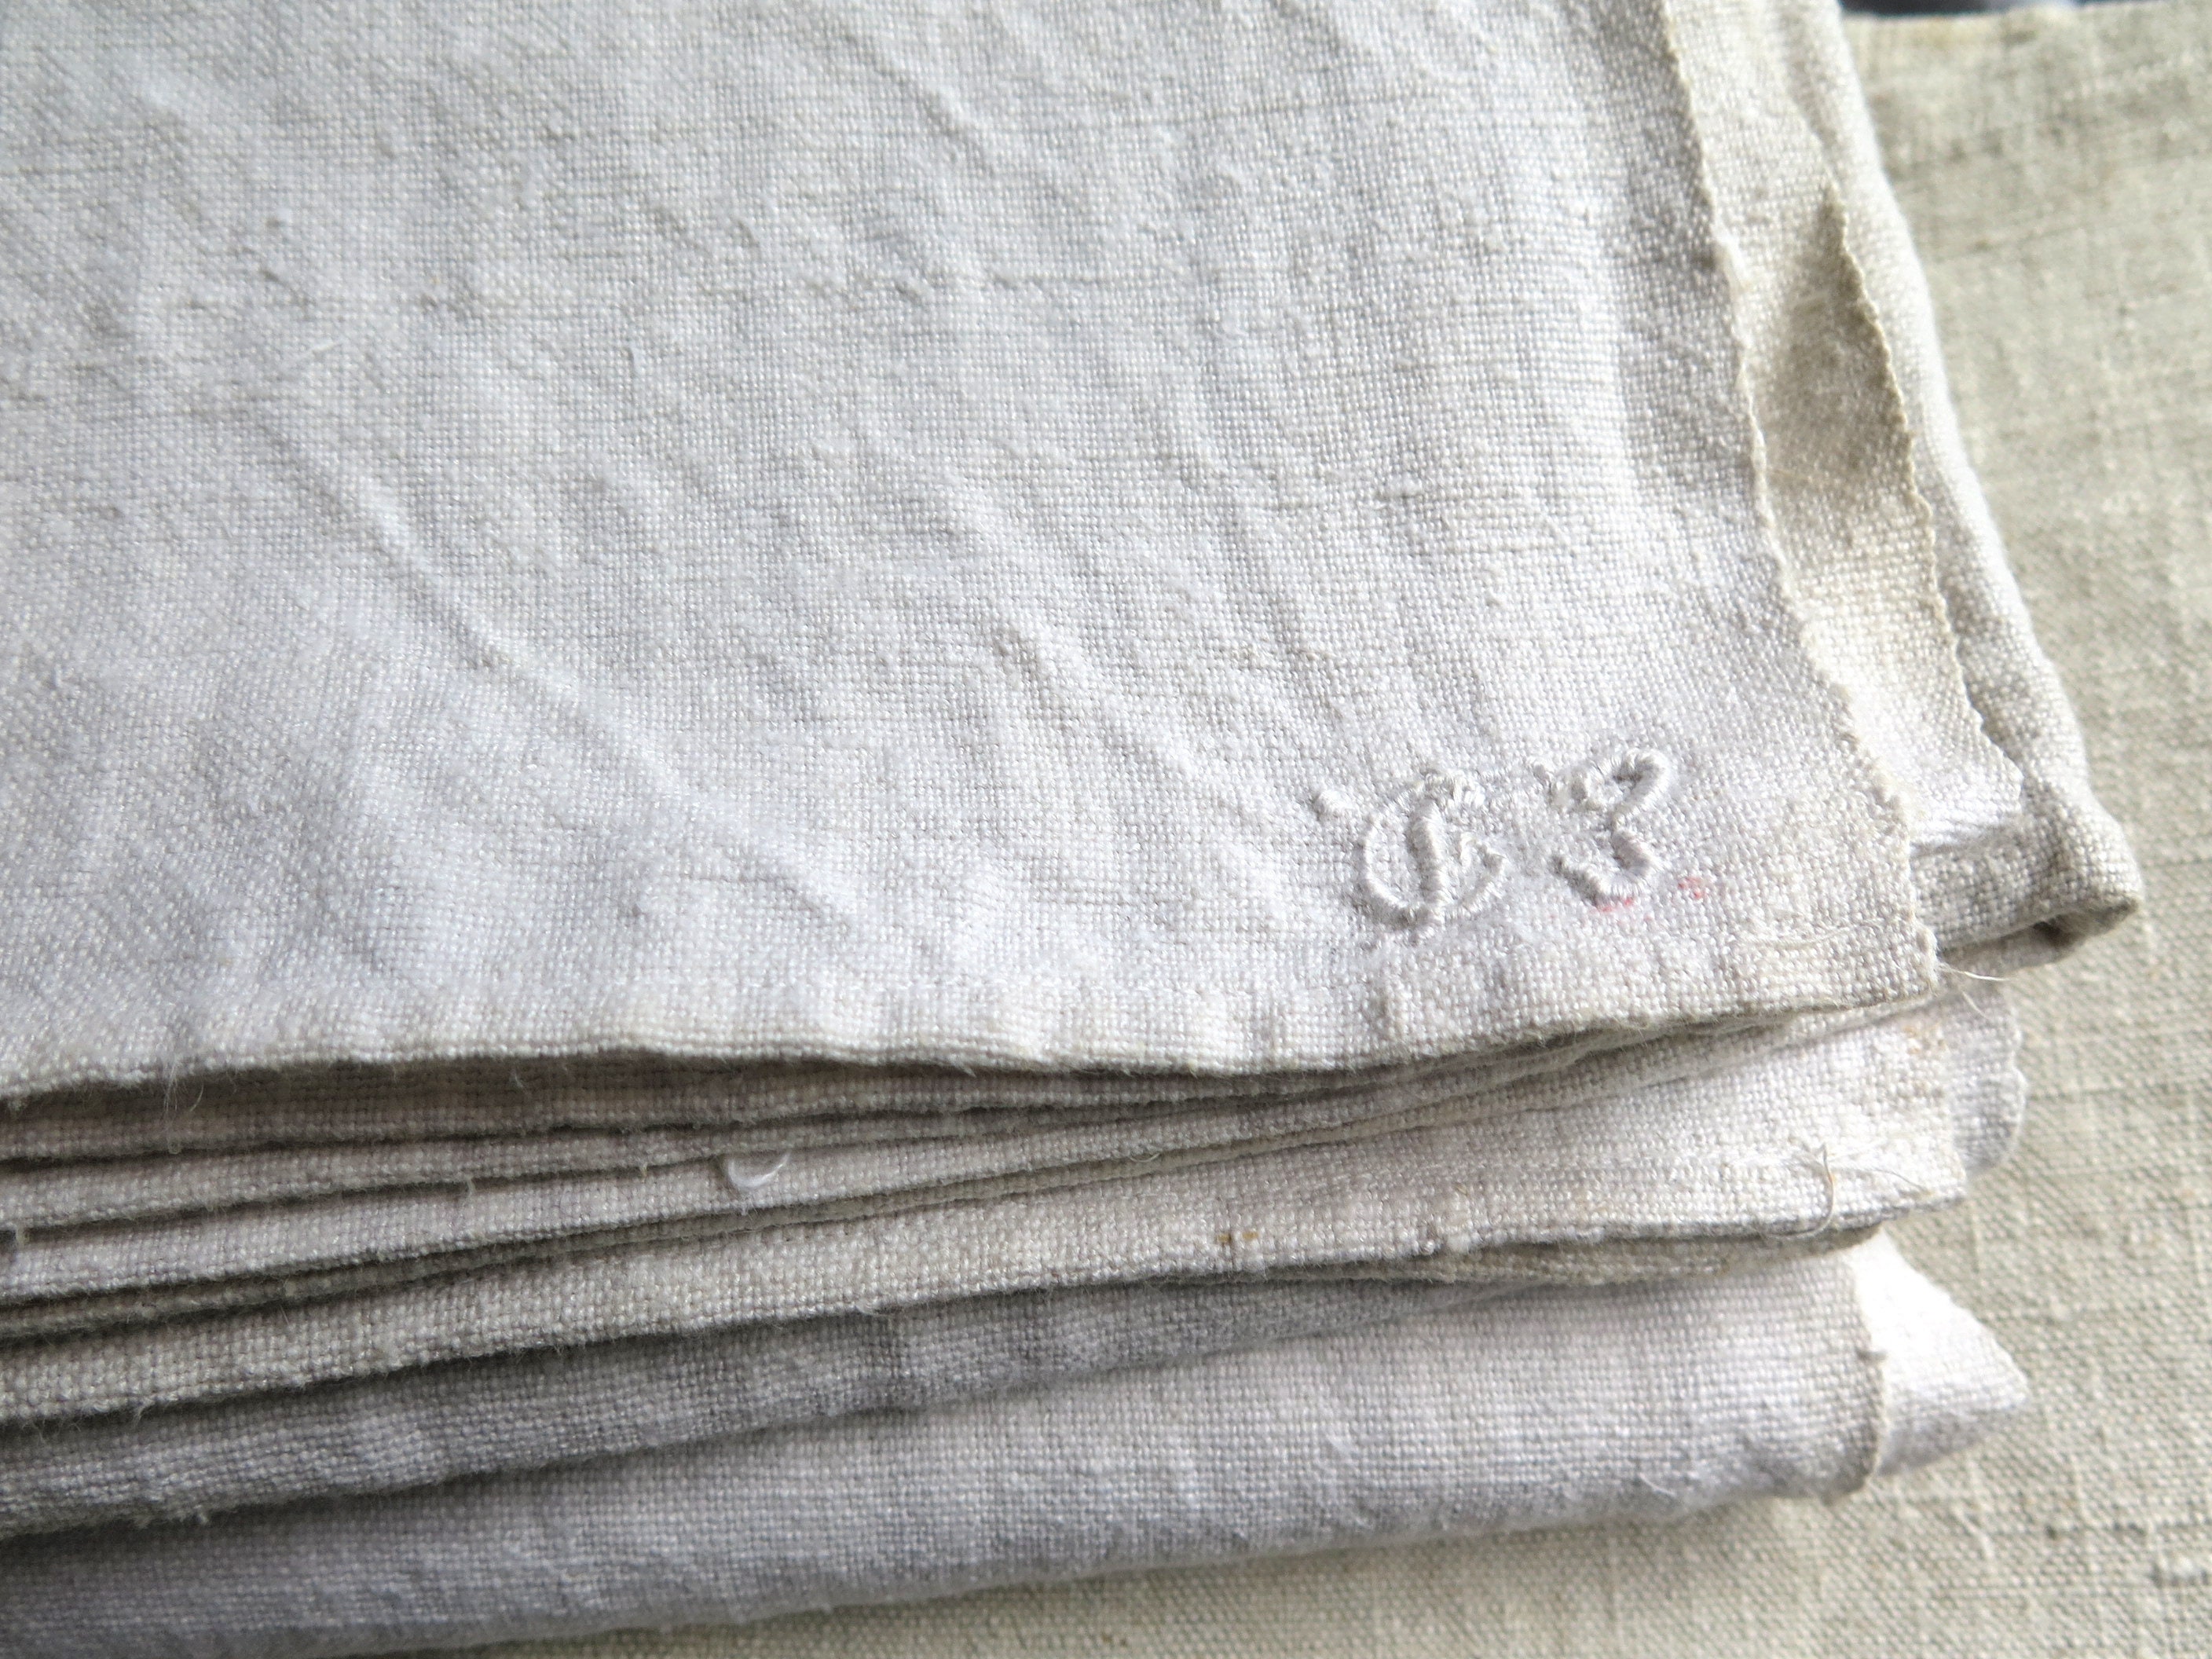 Natural rustic linen fabric, Fabric by the yard, Undyed rustic linen fabric,  Unwashed linen fabric, Natural linen fabric, Sewing fabric